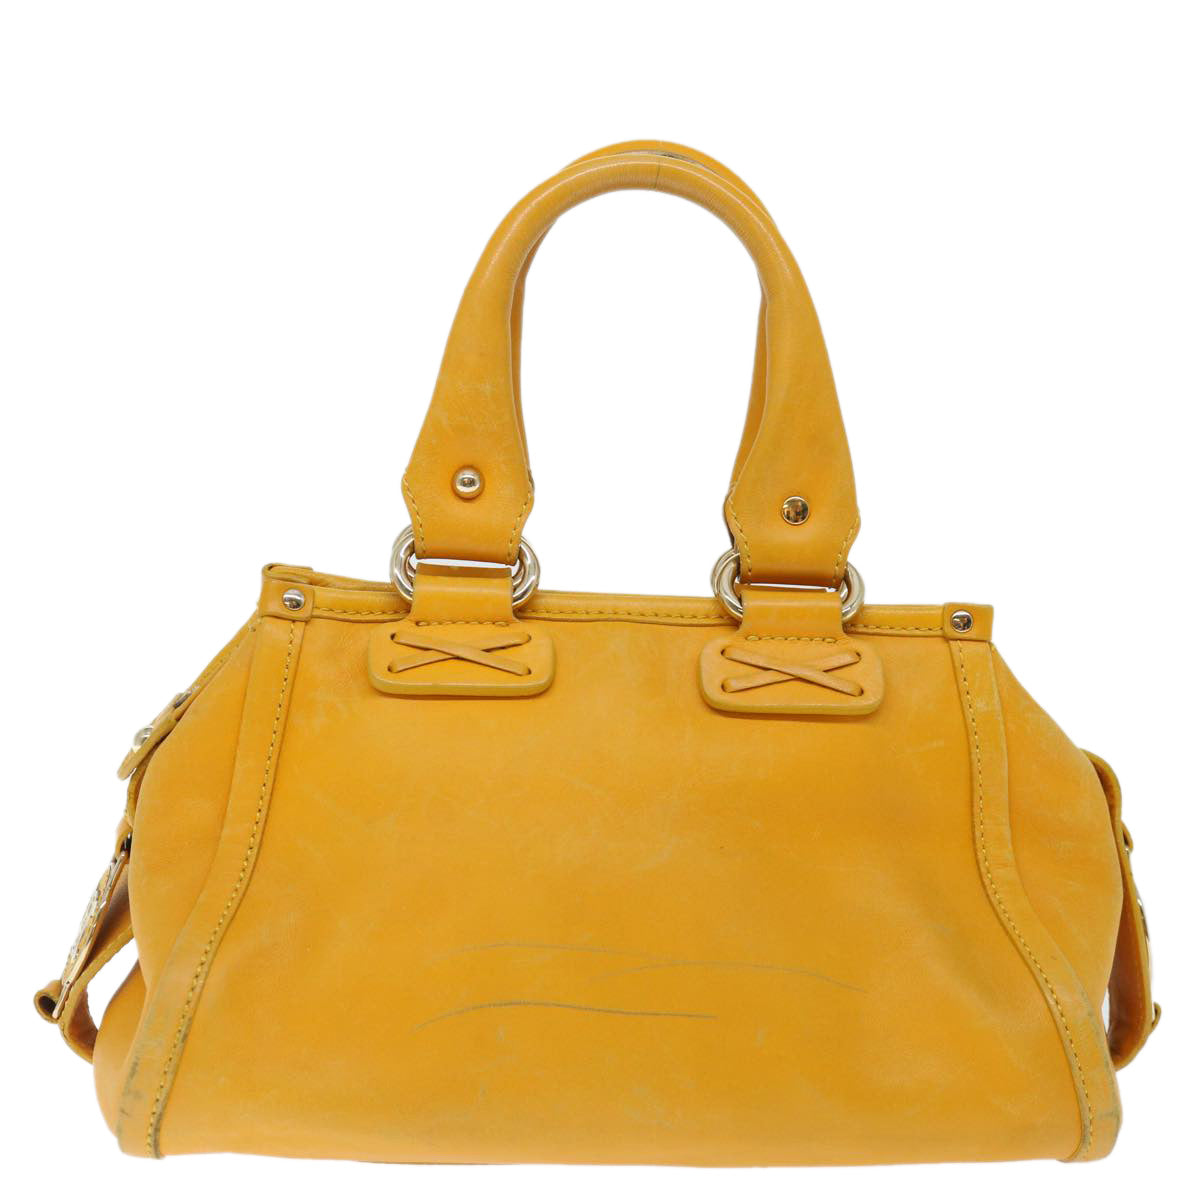 CELINE Hand Bag Leather Yellow Auth fm3342 - 0